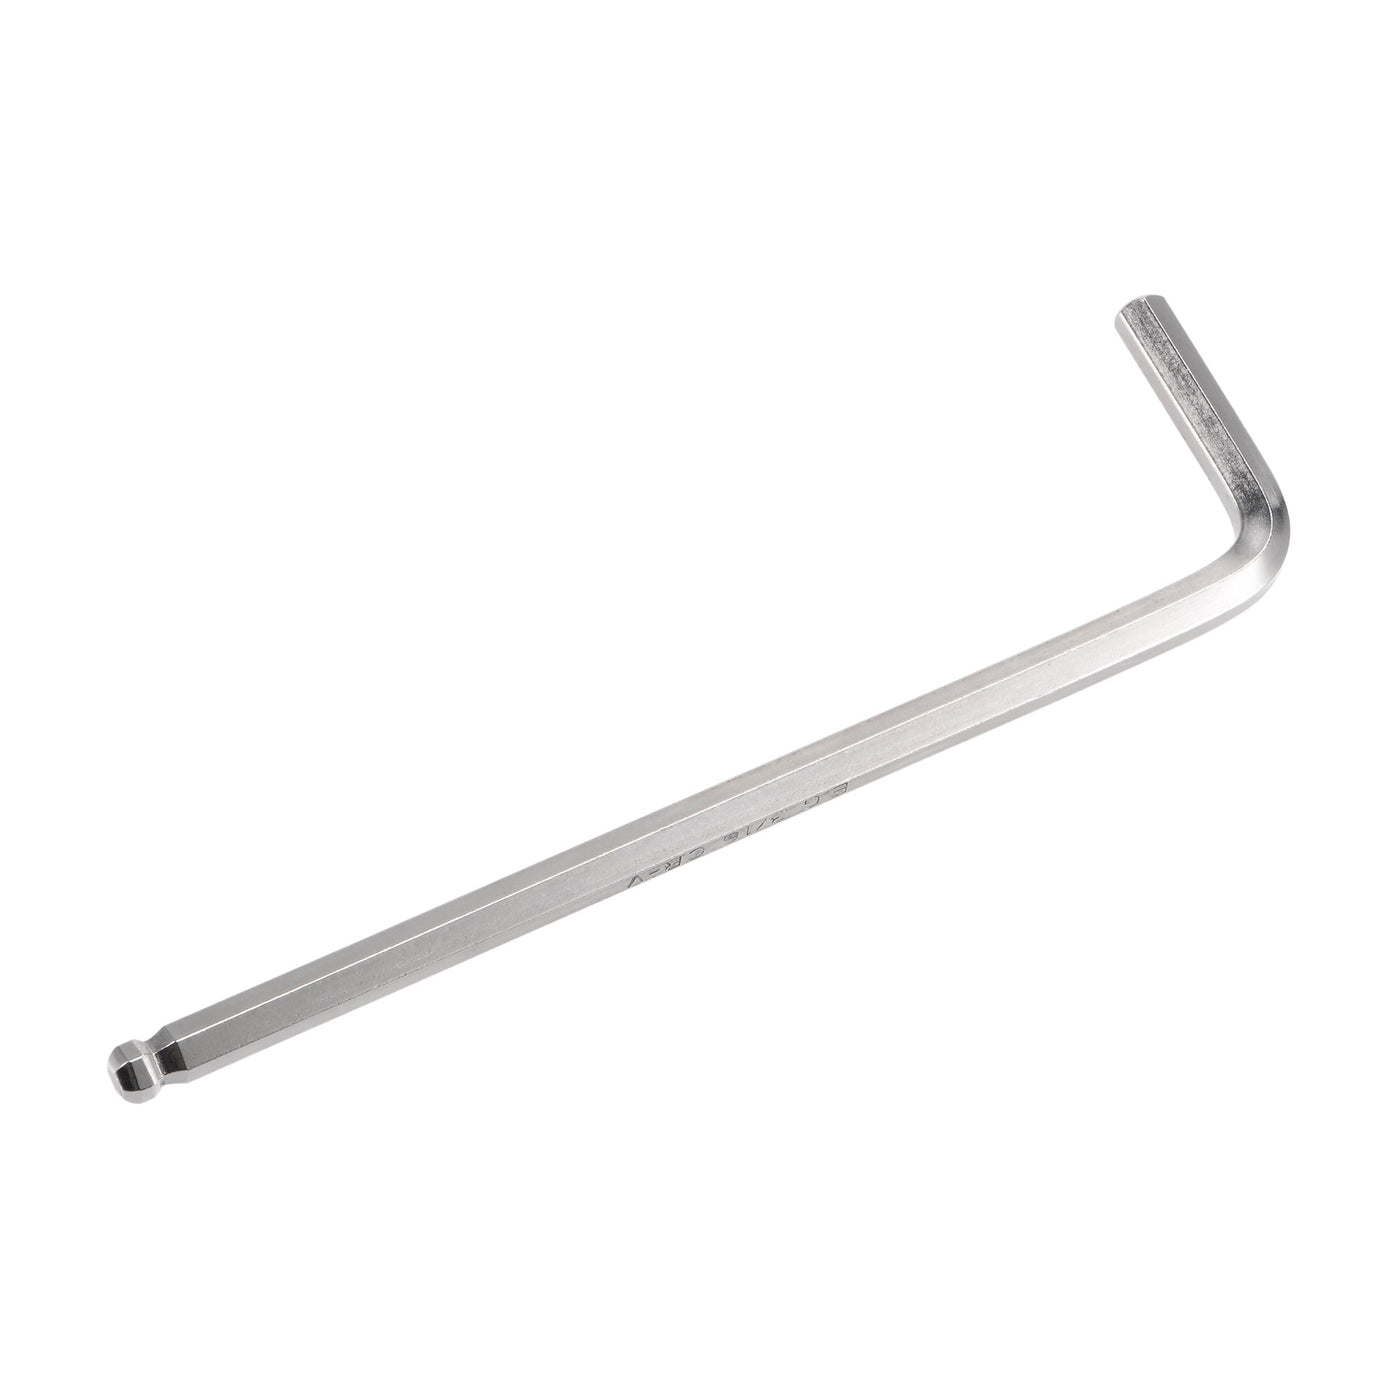 uxcell Uxcell Ball End Hex Key Wrench, L Shaped Long Arm CR-V Repairing Tool